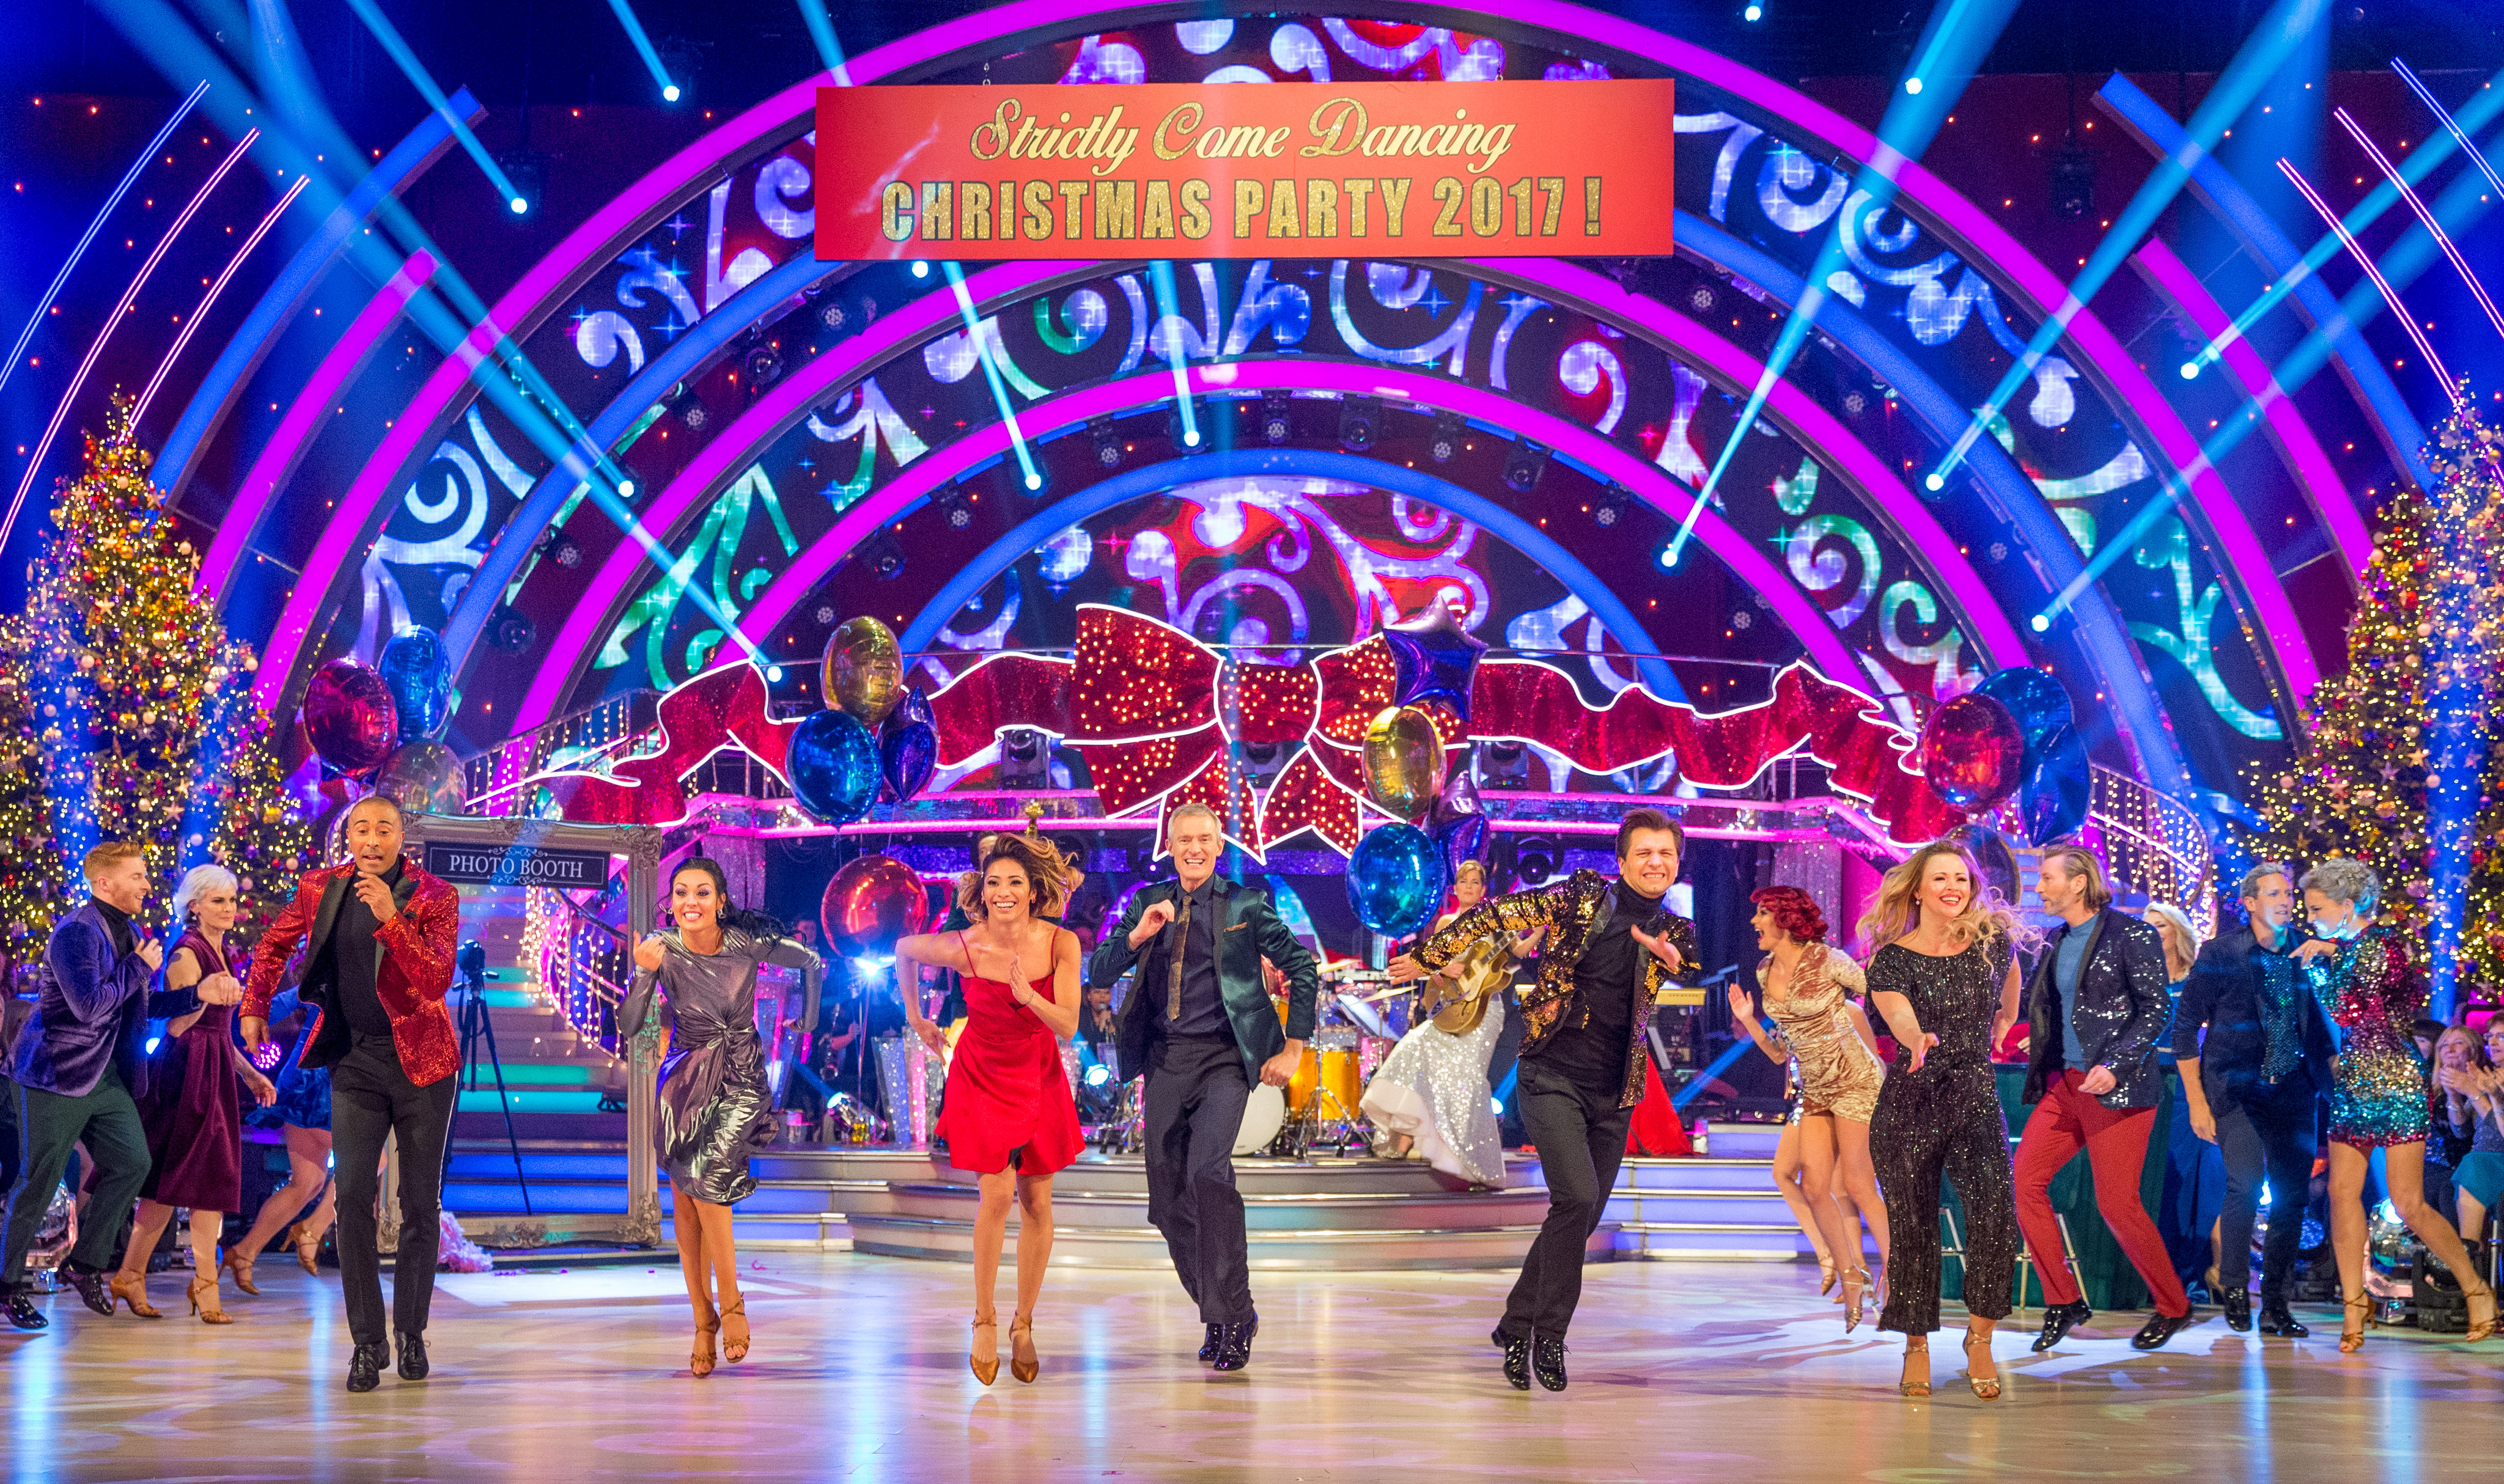 Strictly Come Dancing Christmas Special 2017 